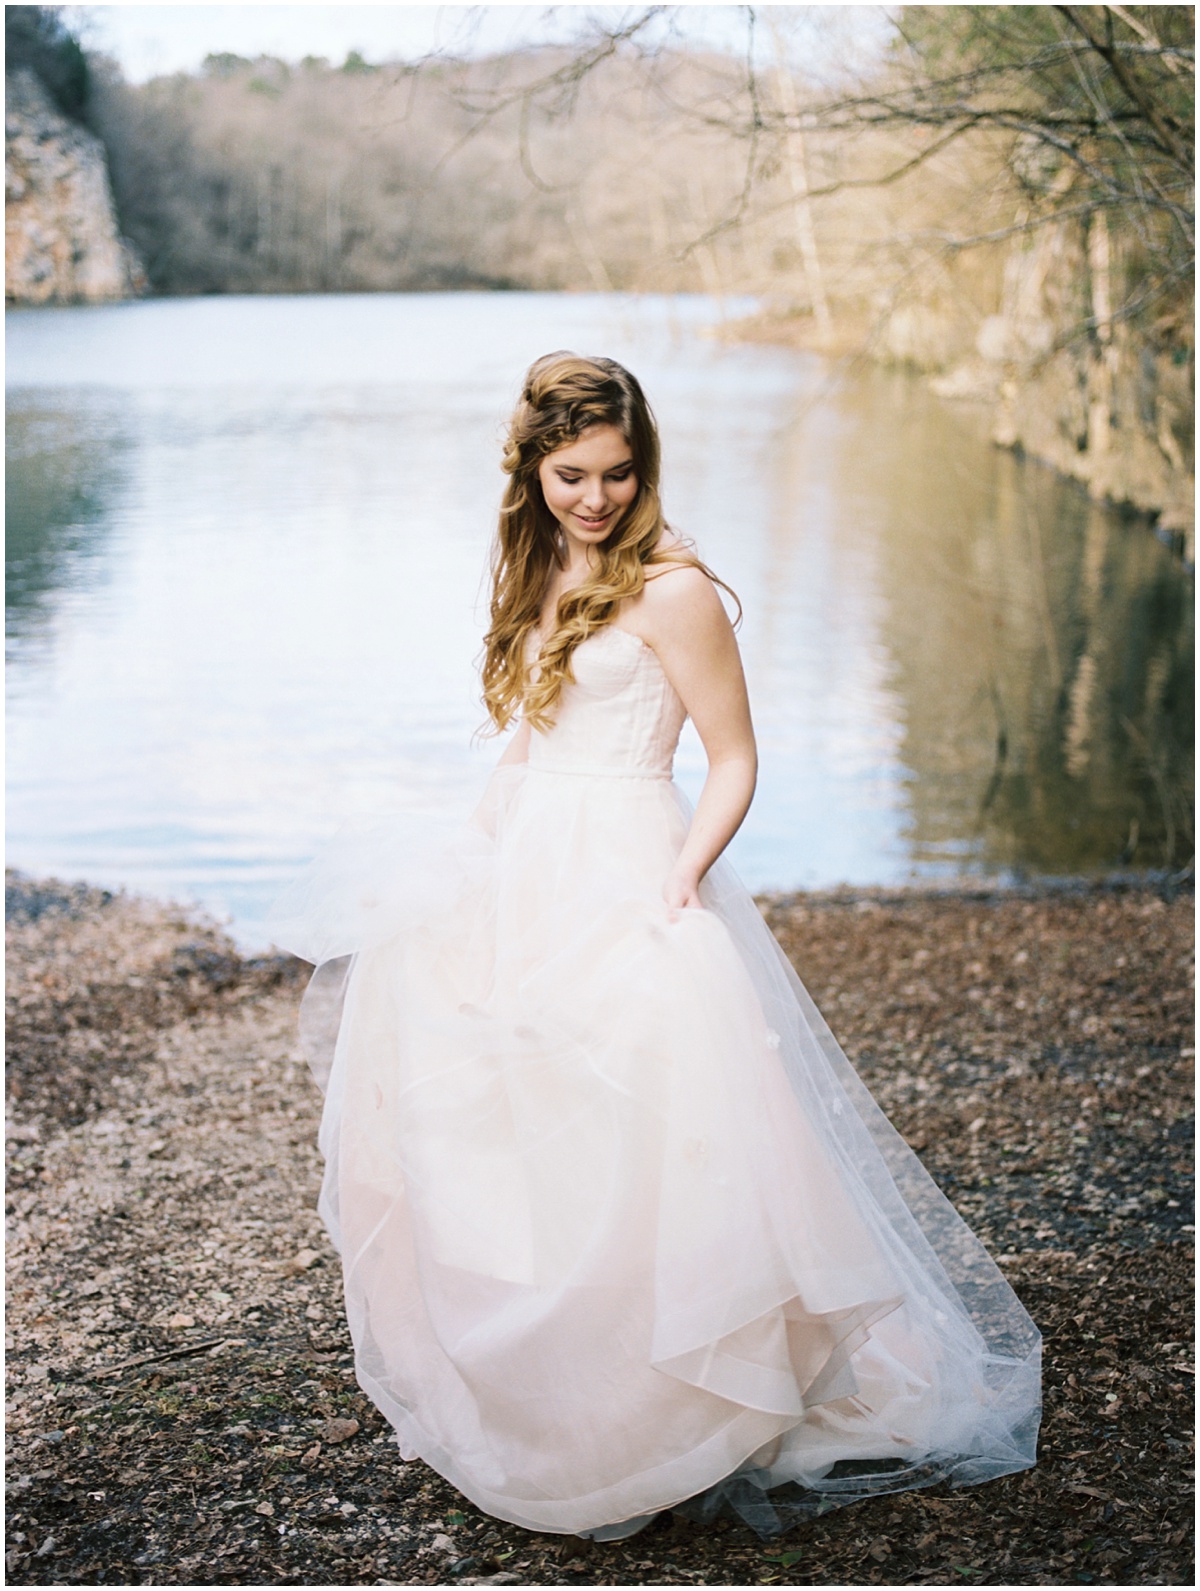 Abigail_Malone_Film_Wedding_Photography_KNoxville_TN_Blush_Dress_Outdoor_Windy_Pink_and_Green_Wedding_0021.jpg